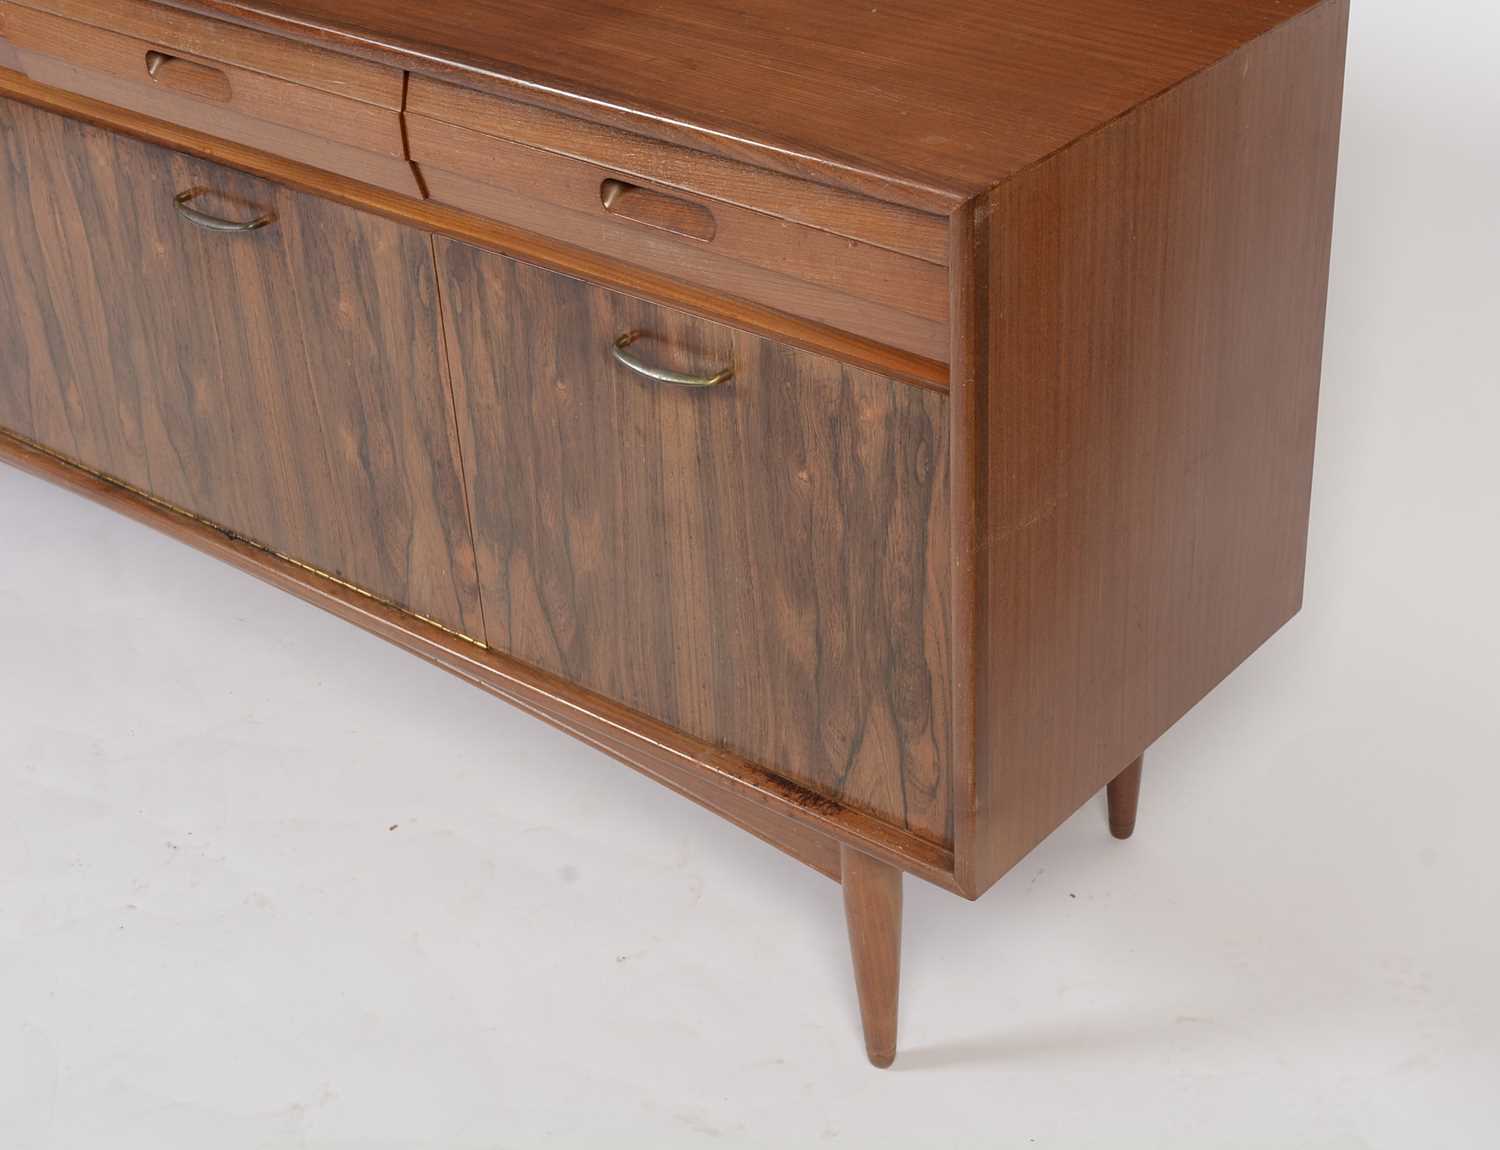 A mid Century teak and rosewood sideboard, possible by Elliotts of Newbury - Image 2 of 16